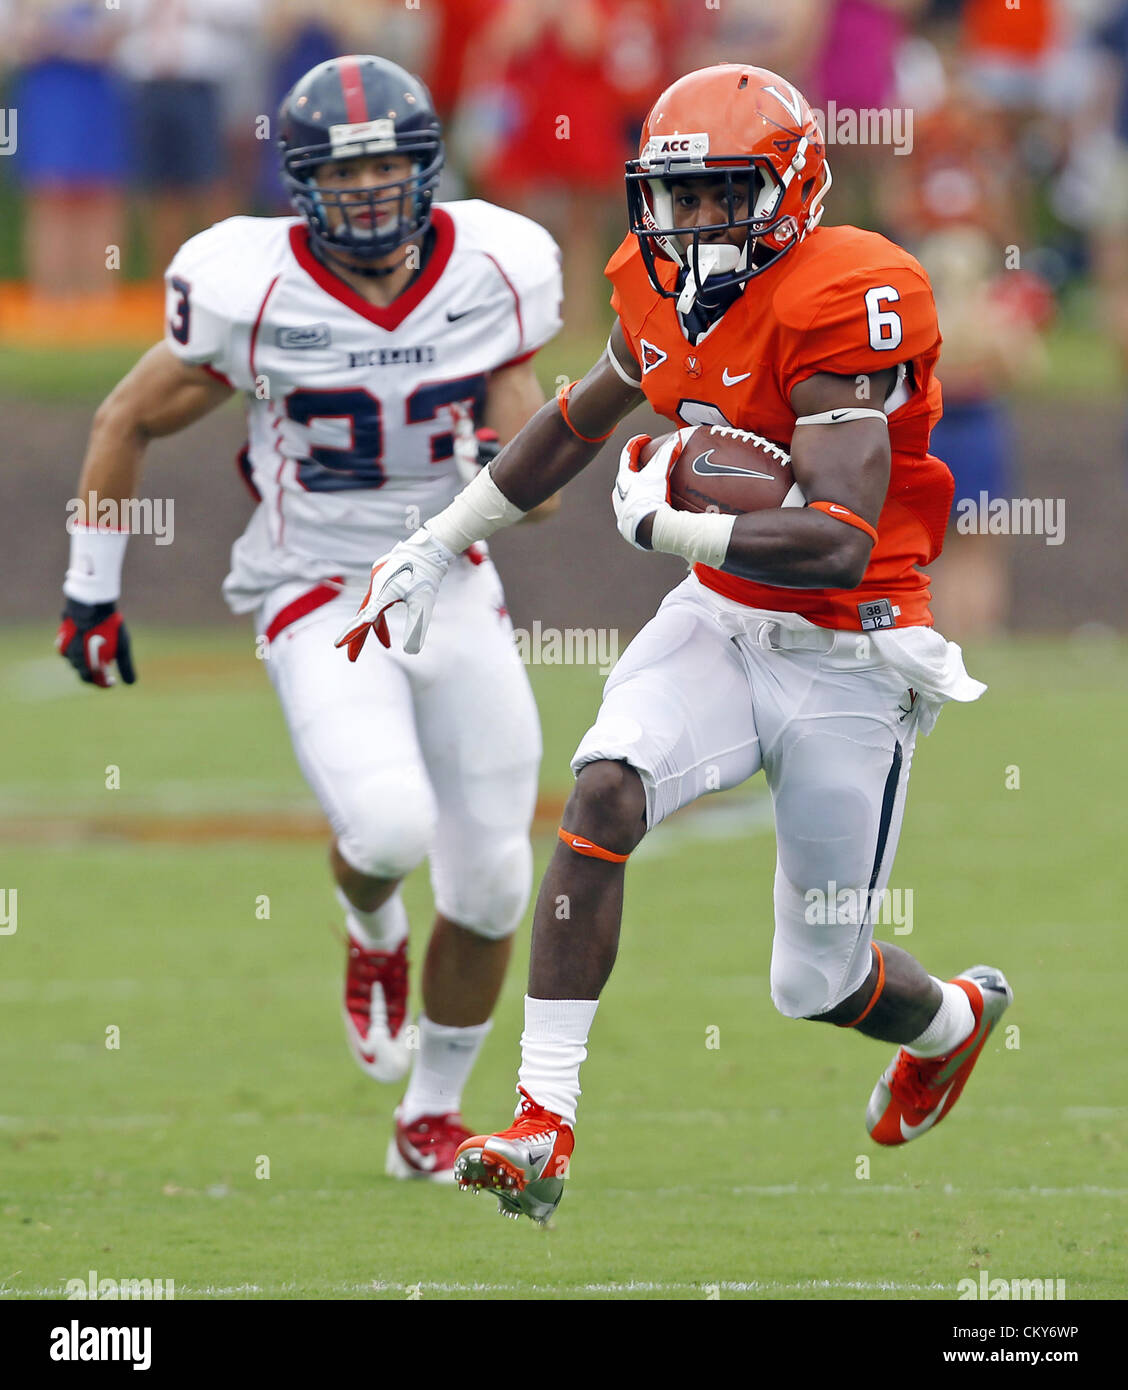 Sept. 1, 2012 - Charlottesville, Virginia, UNITED STATES - Virginia Cavaliers wide receiver Darius Jennings (6) runs a ctach in for a touchdown in front of Richmond Spiders defensive back Doug Howell (33) during the first half of the NCAA football game Saturday September, 1, 2012 at Scott Stadium in Charlottesville, Va. (Credit Image: © Andrew Shurtleff/ZUMAPRESS.com) Stock Photo